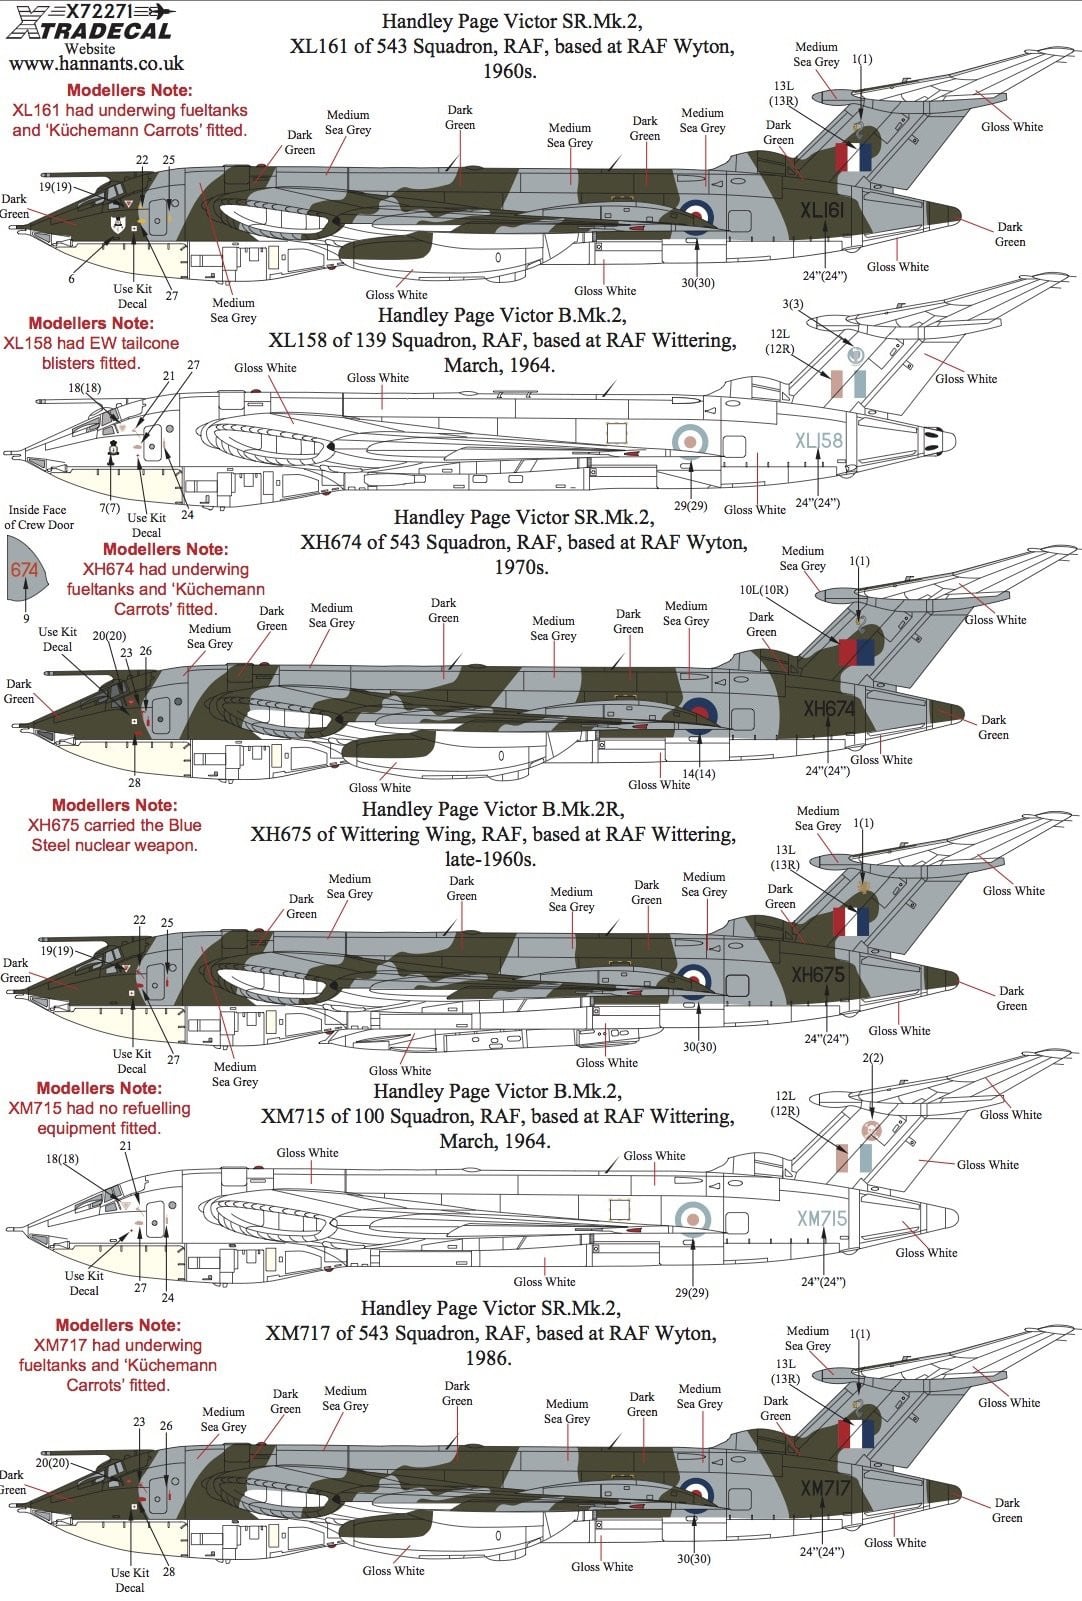 Xtradecal X72271 1/72 Handley-Page Victor B.2 Collection Model Decals - SGS Model Store